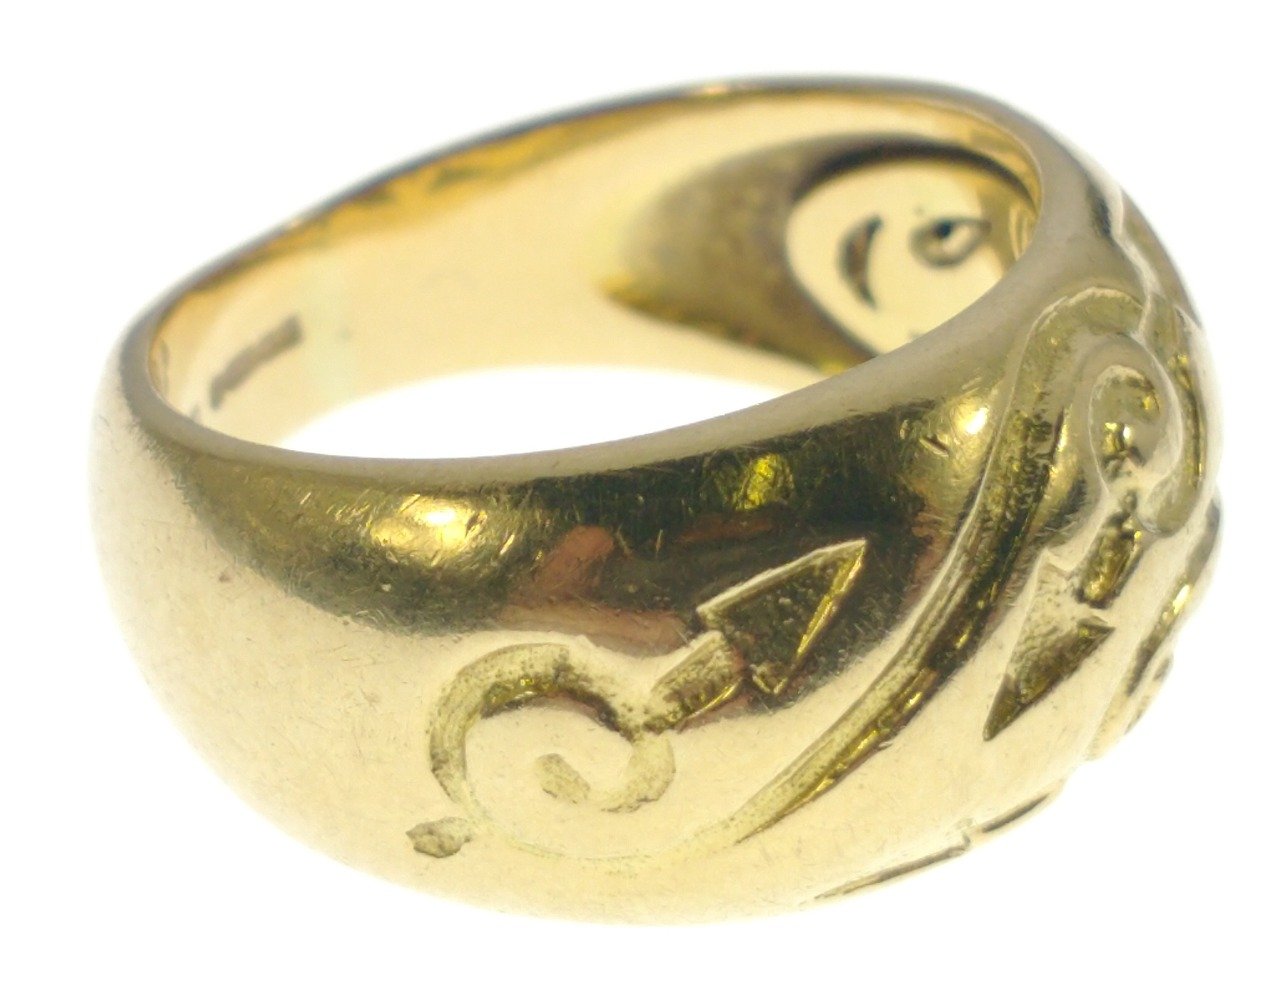 STUNNING! 750 stamped yellow gold RING with scrolled engraving, ring size M, weight 8.50g approx - Image 2 of 4